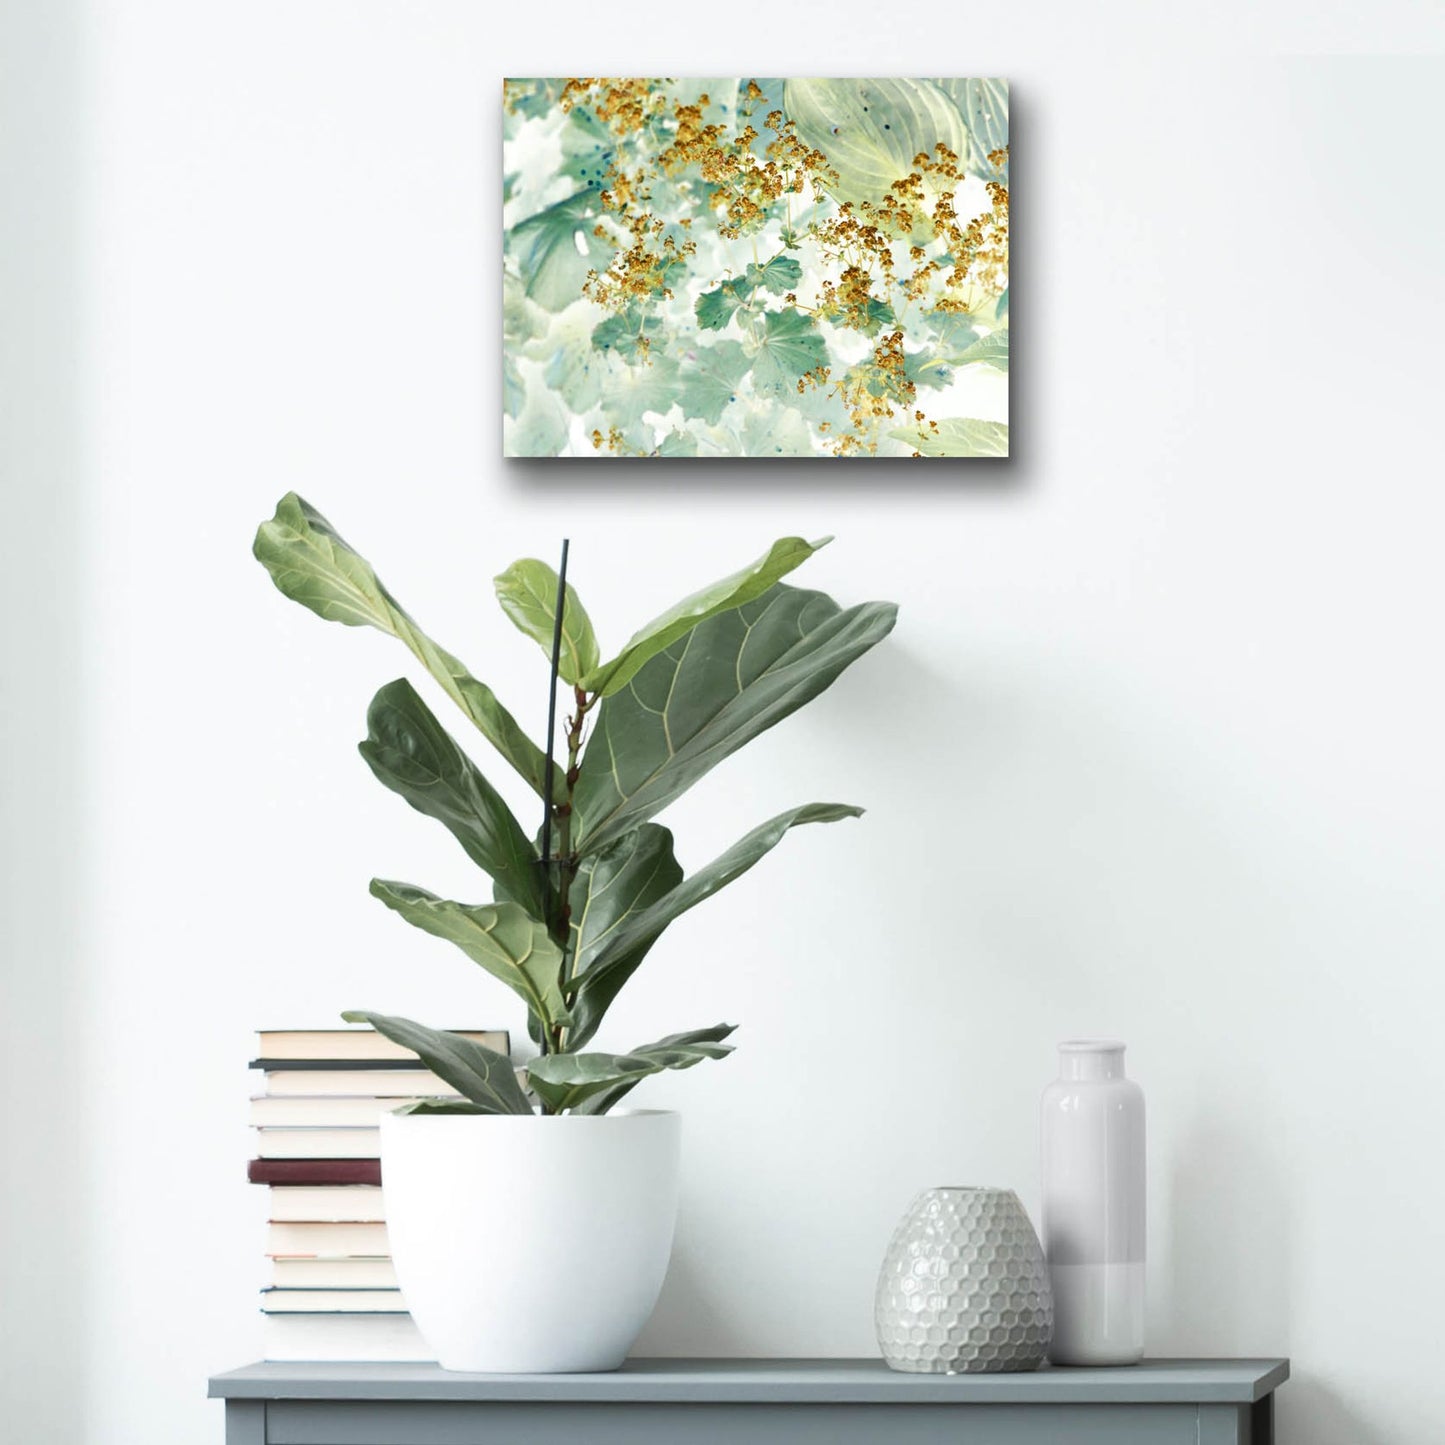 Epic Art ' Golden Lady's Mantle' by Judy Stalus, Acrylic Glass Wall Art,16x12